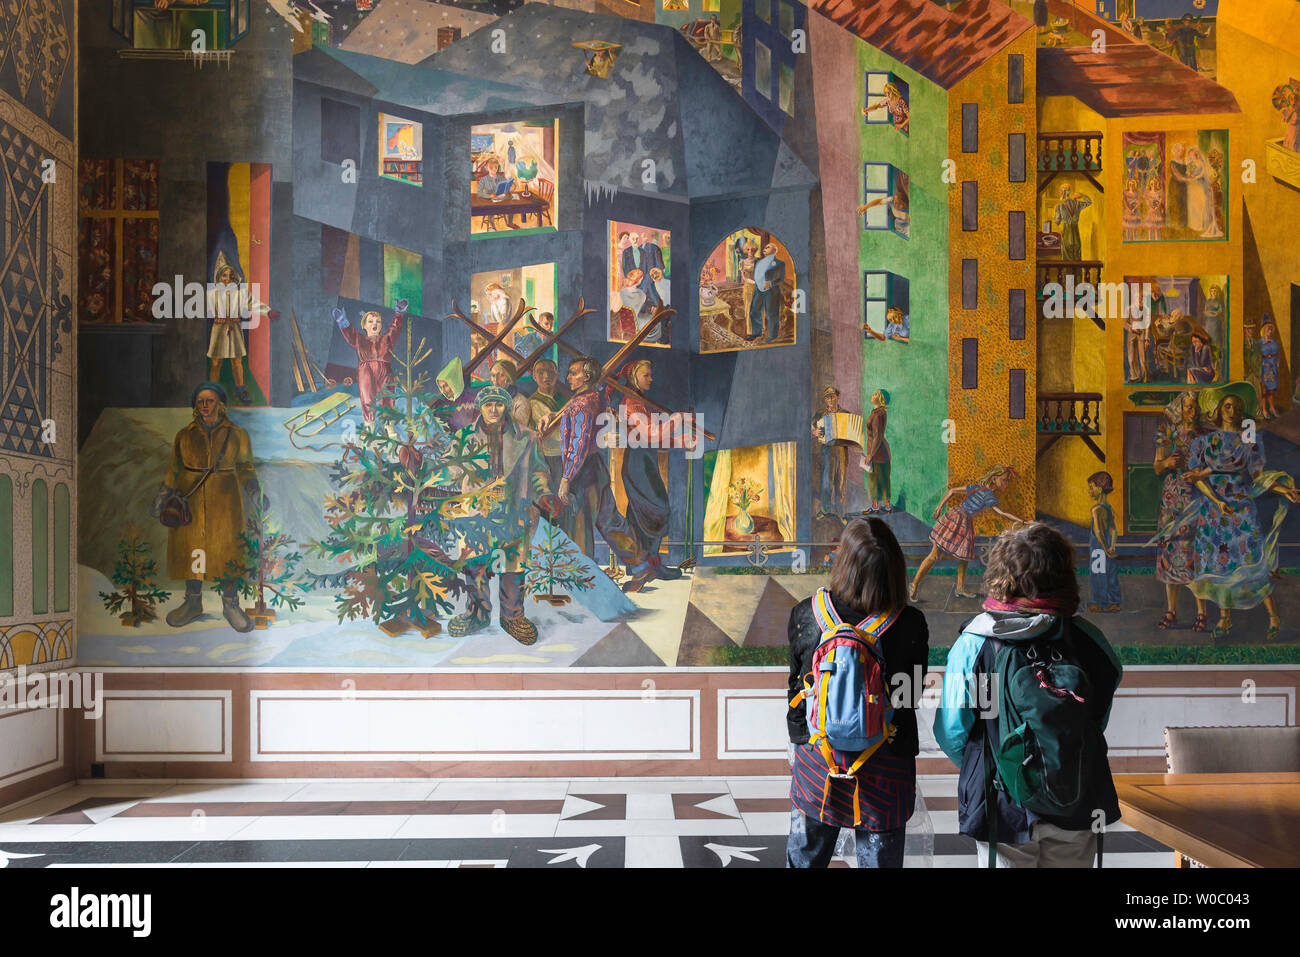 Women travel, rear view of two women with backpacks looking at the colourful Per Krohg fresco inside the East Gallery of Oslo City Hall, Norway. Stock Photo